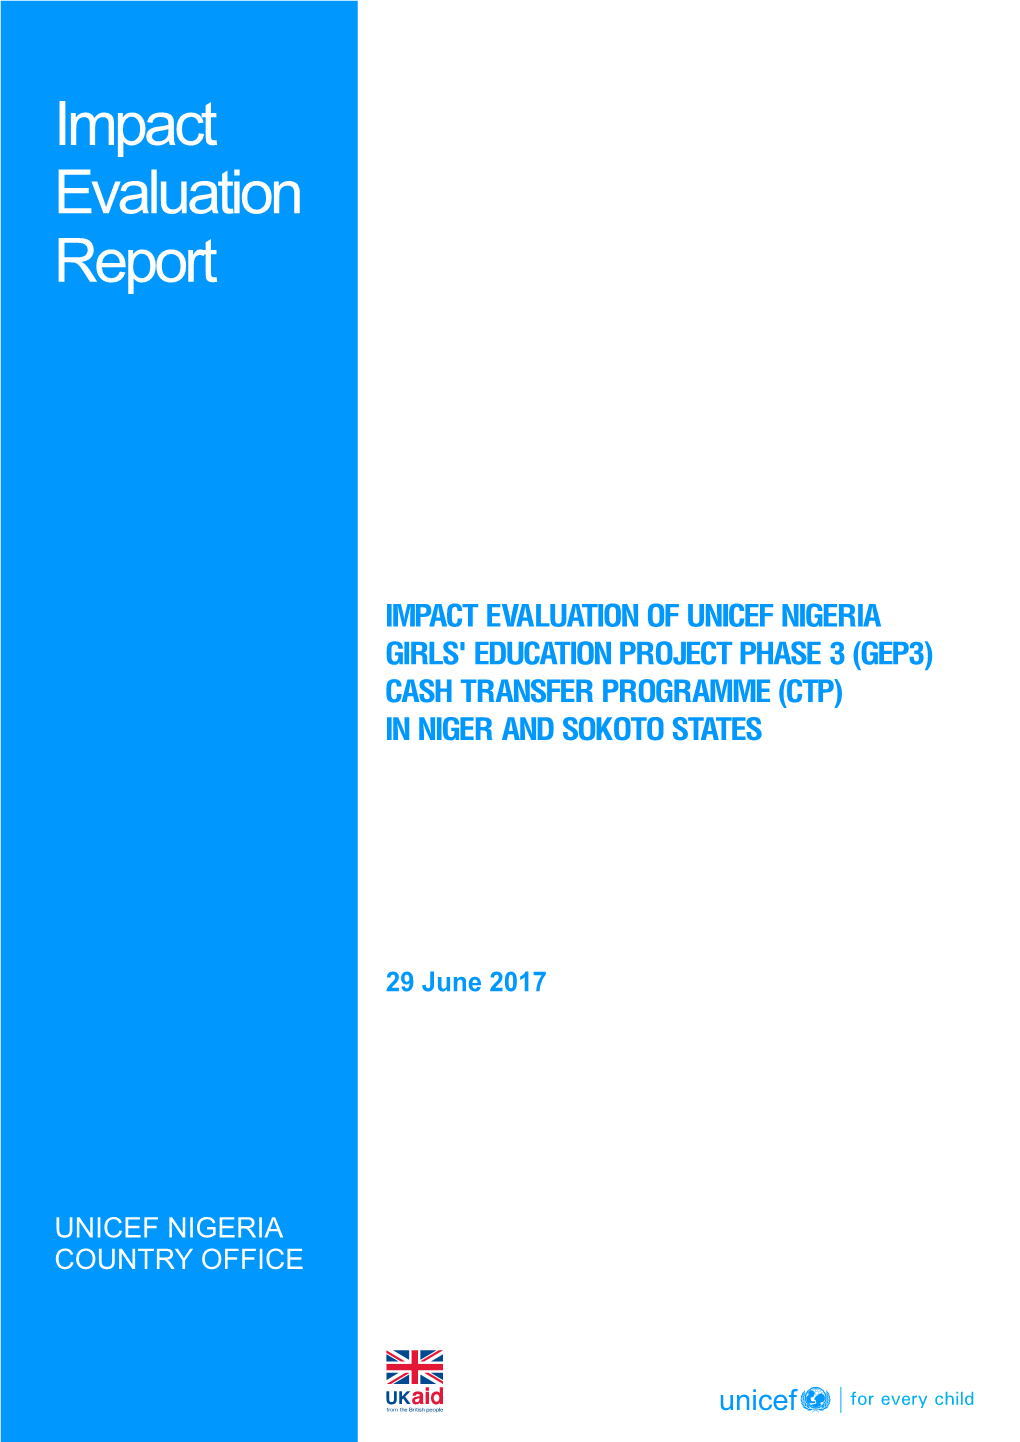 Impact Evaluation of Unicef Nigeria Girls' Education Project Phase 3 (Gep3) Cash Transfer Programme (Ctp) in Niger and Sokoto States